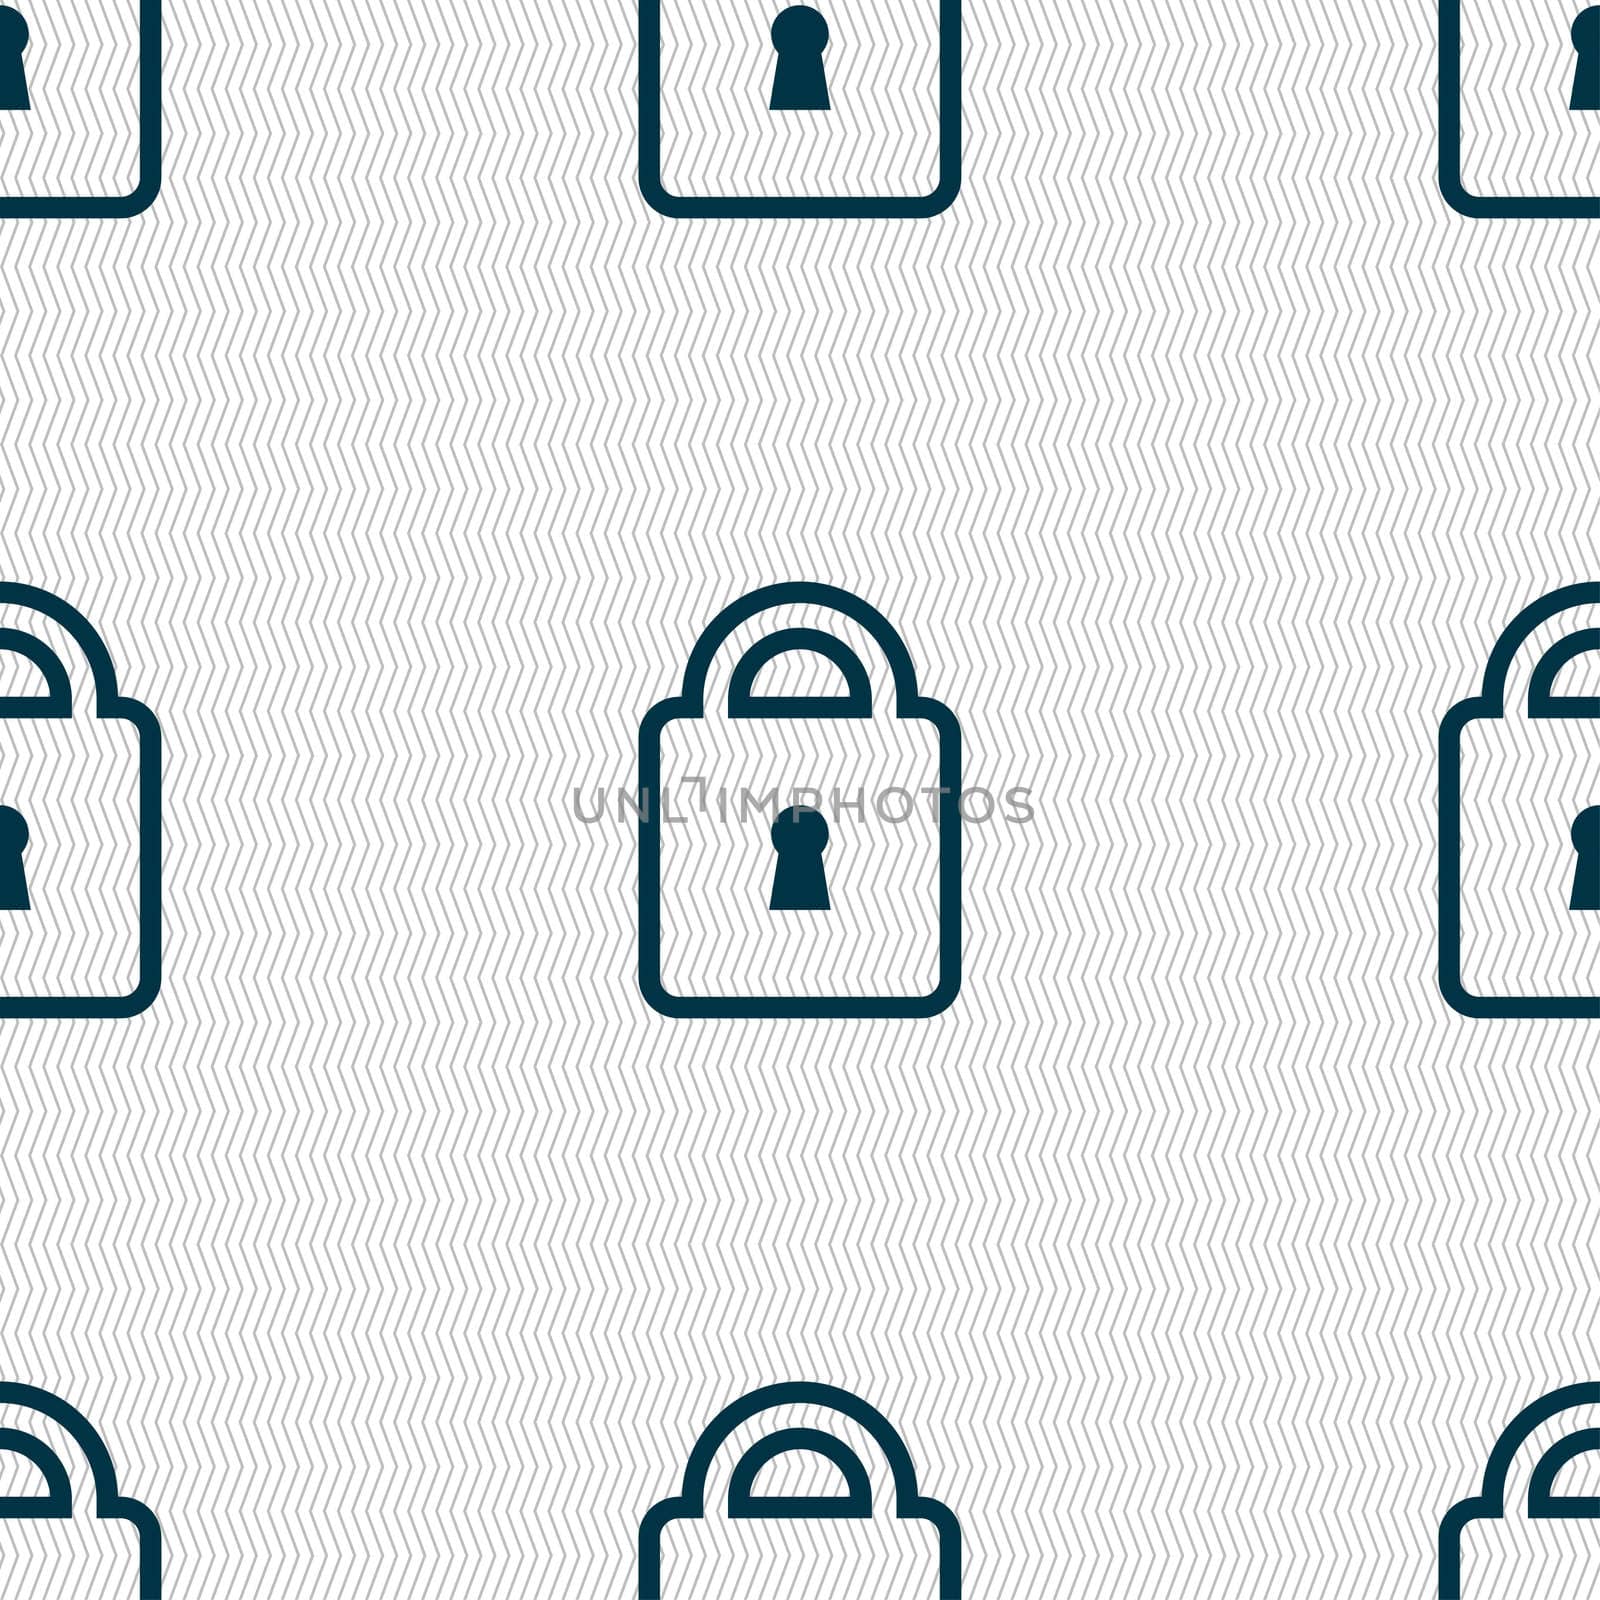 Lock icon sign. Seamless pattern with geometric texture. illustration